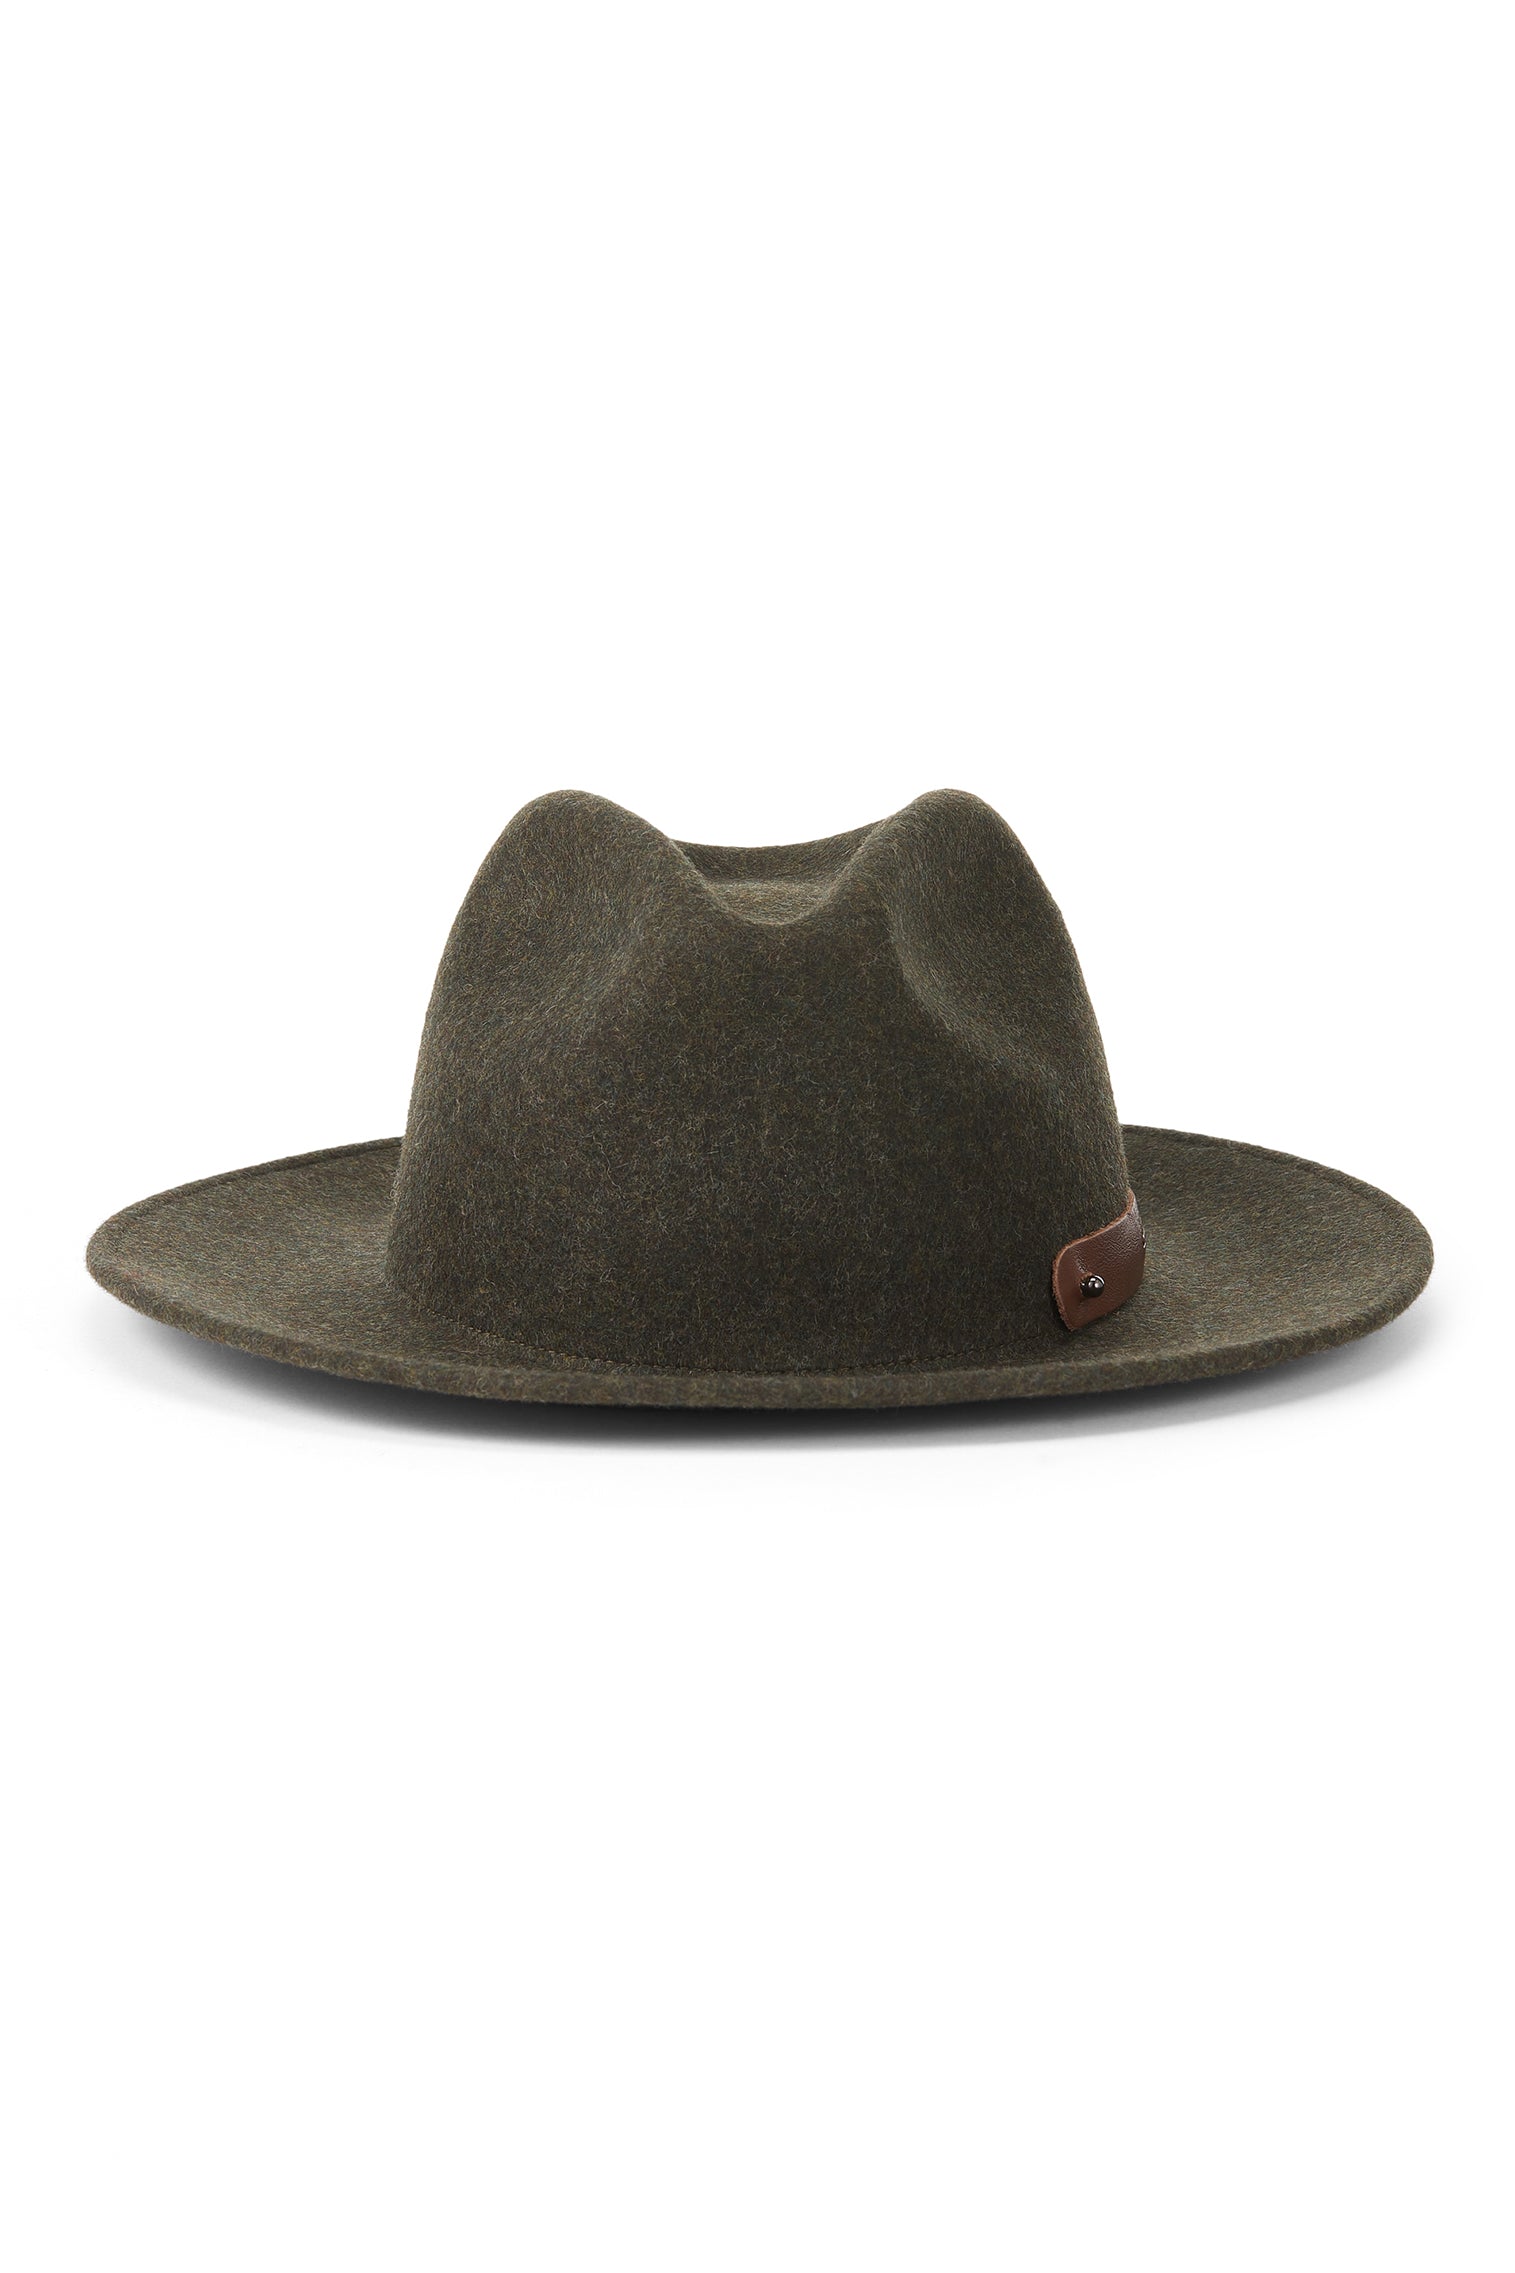 Cheltenham Rollable Trilby - Hats for Oval Face Shapes - Lock & Co. Hatters London UK